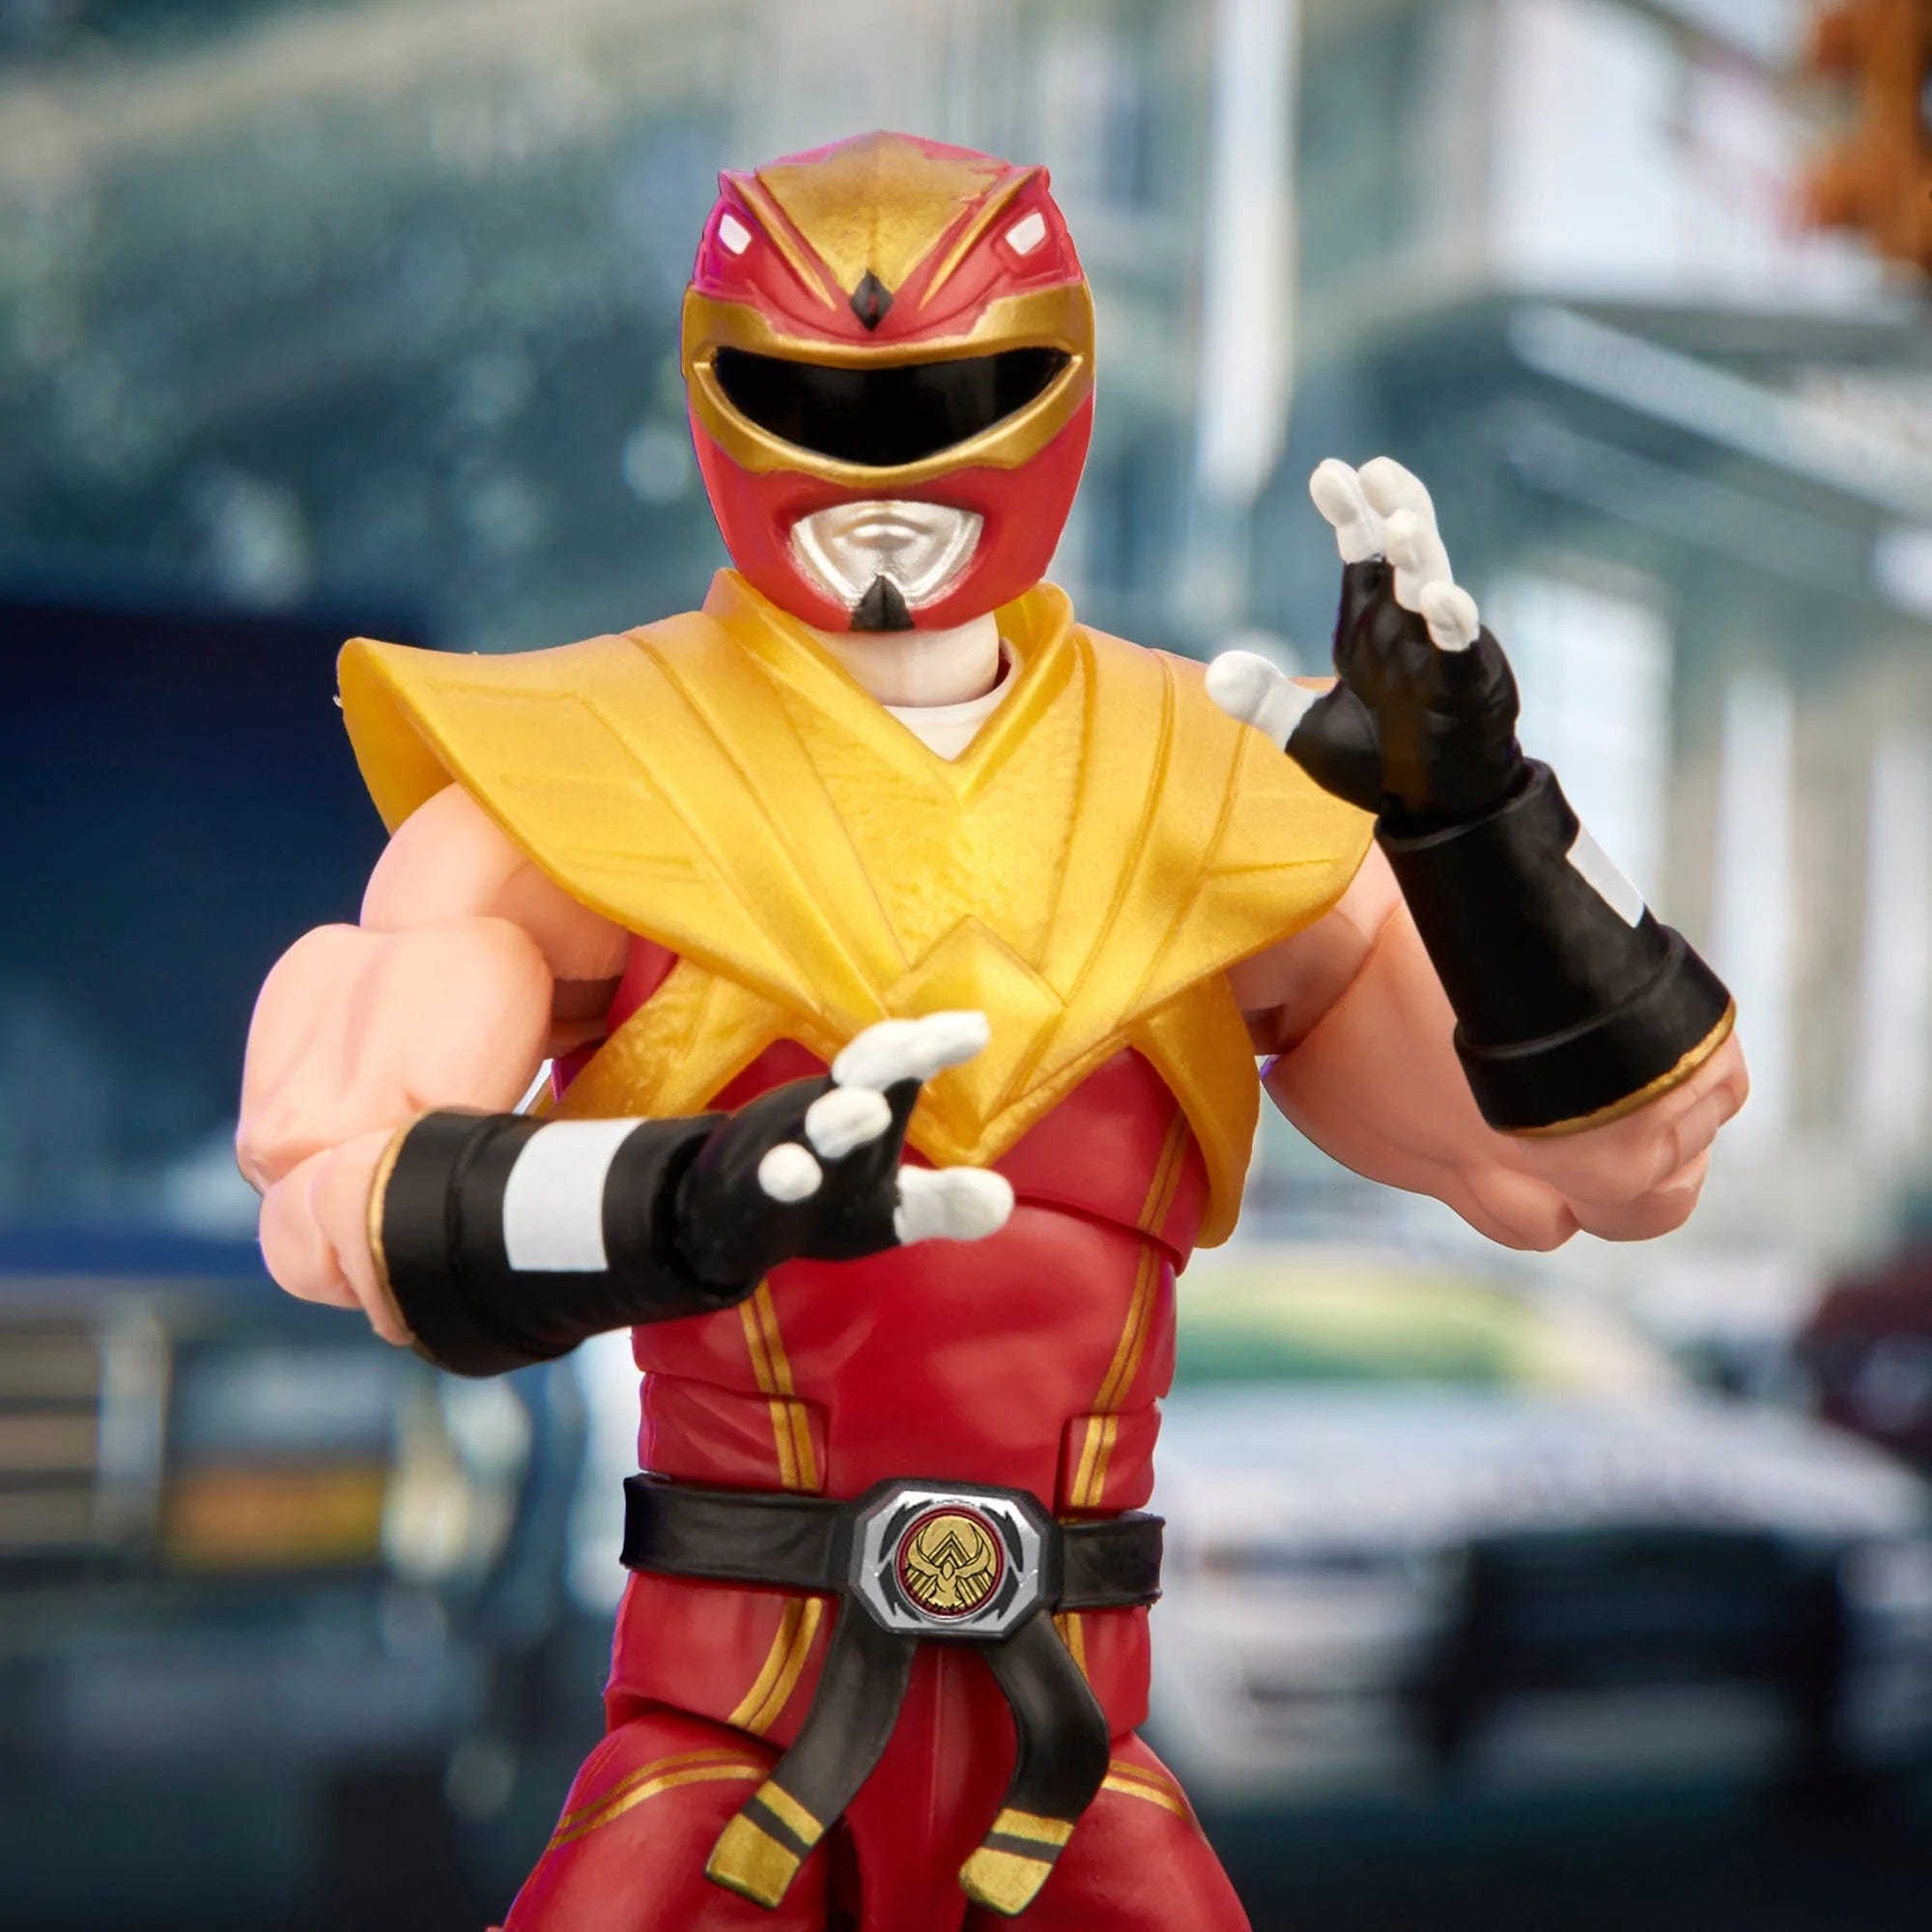 Power Rangers X Street Fighter Lightning Collection Morphed Ken Soaring Falcon Media.